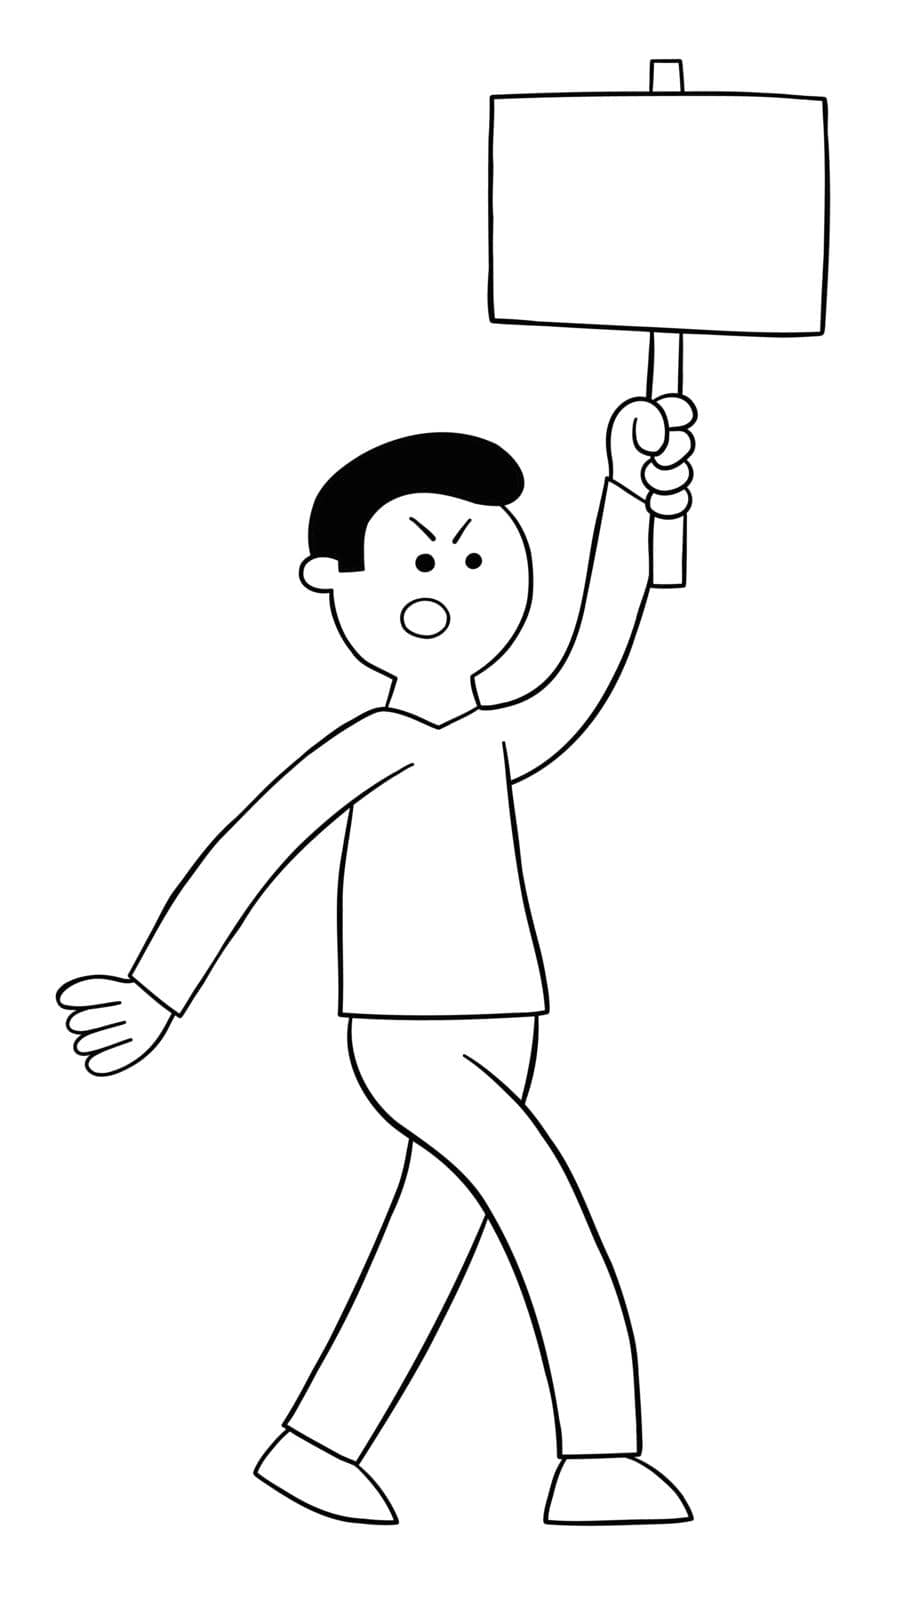 Cartoon angry protester man holding wooden sign and walking, vector illustration. Black outlined and white colored.